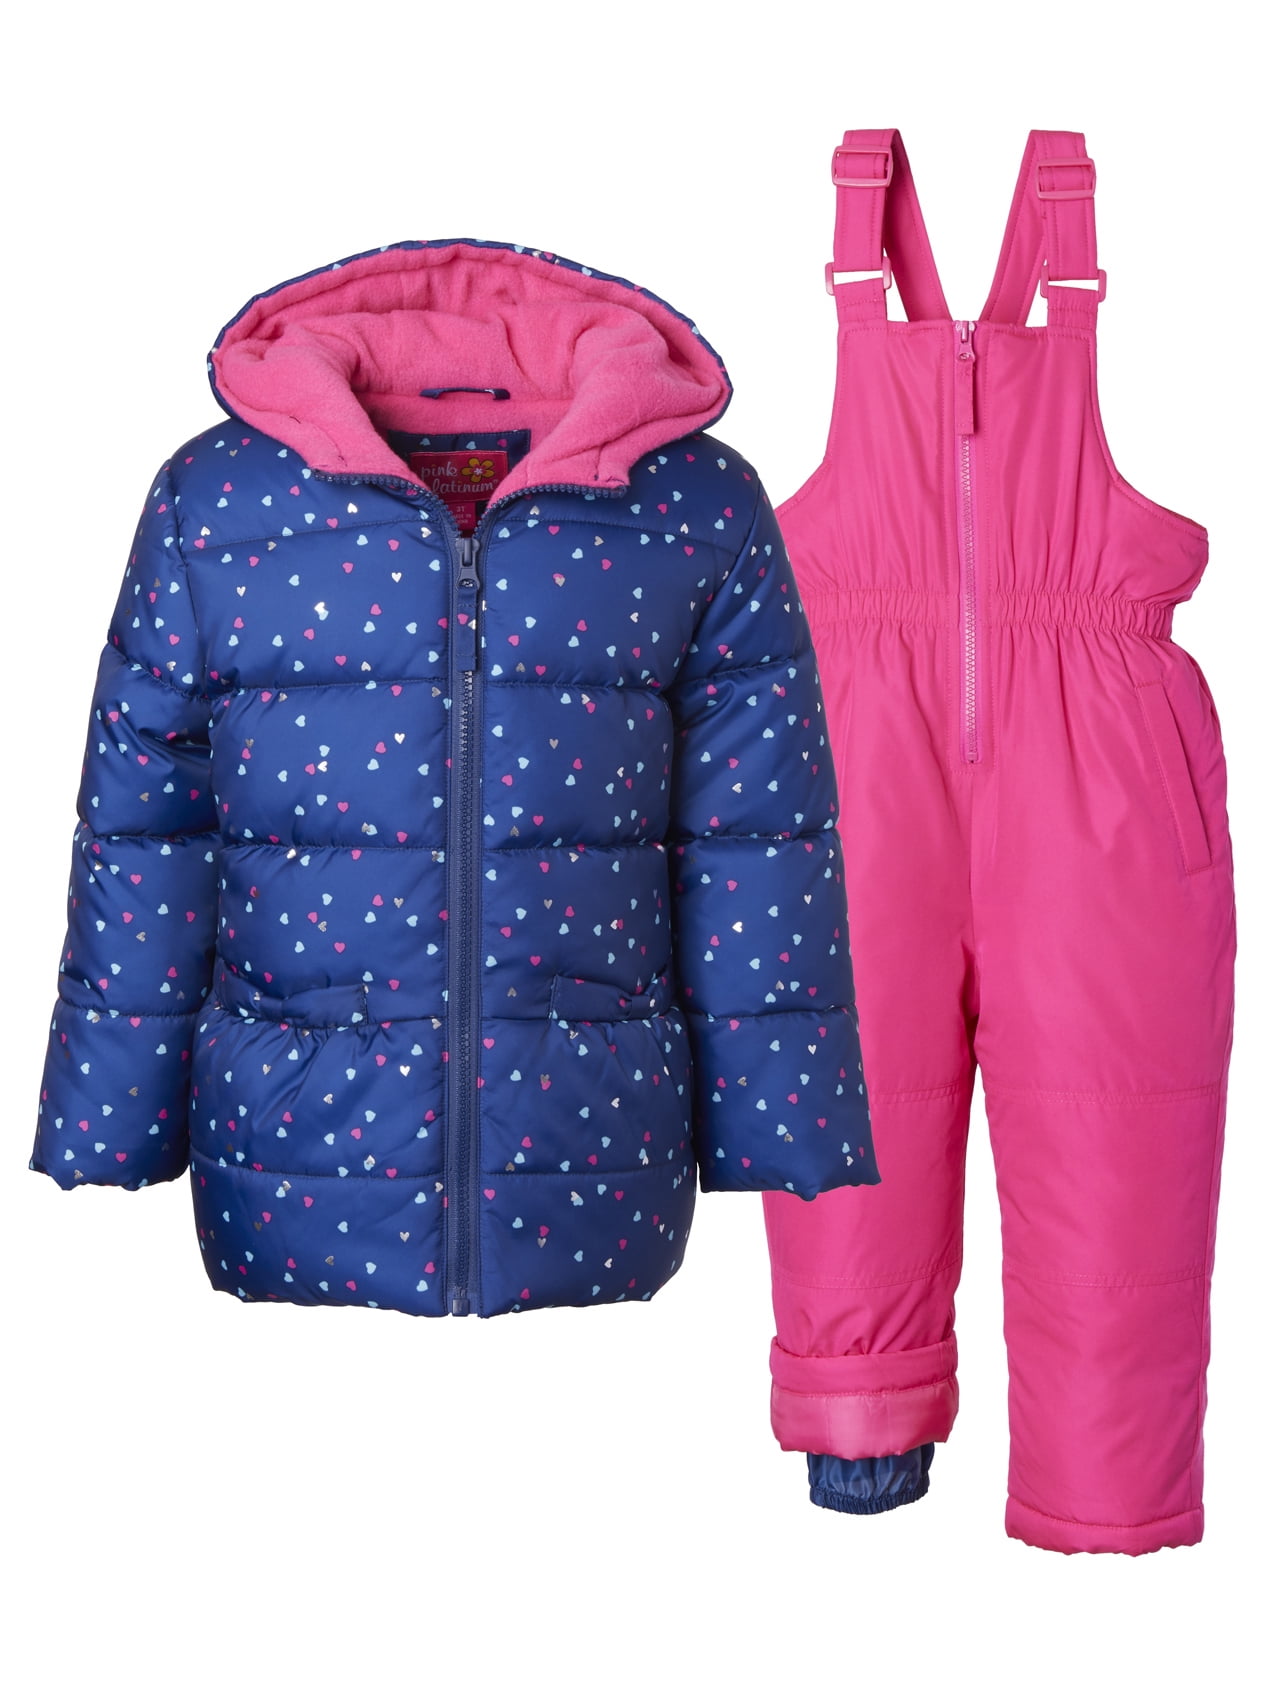 2 Piece Pink Platinum Snowsuit With Snowbibs & Coat ~ Size 12M ~ New With Tags